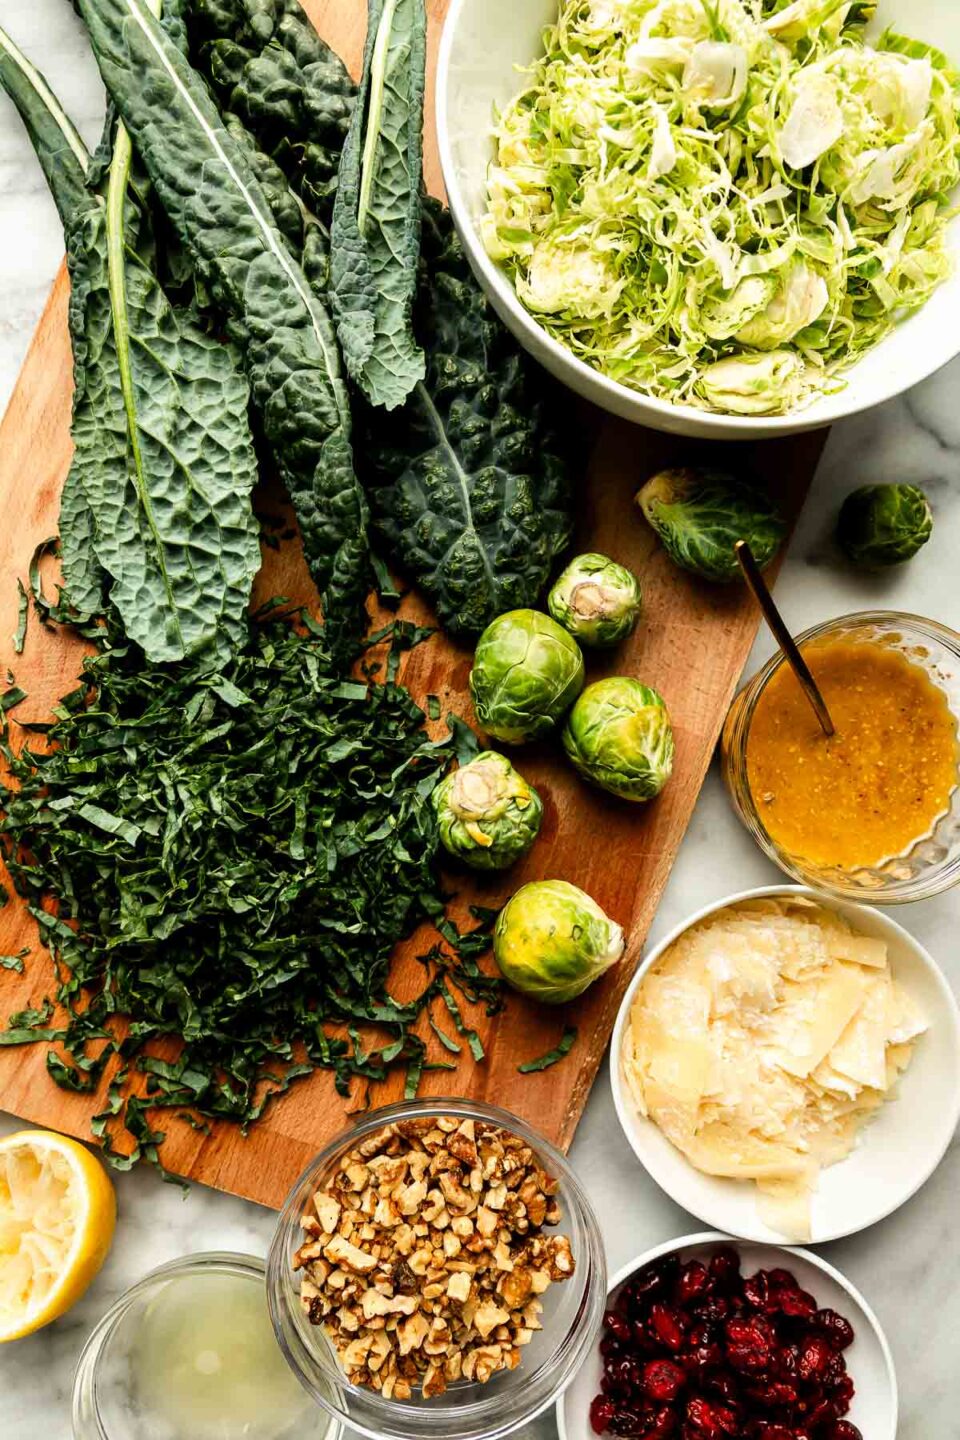 An overhead shot of ingredients displayed on a wooden cutting board and a white marbled surface: whole kale leaves and chopped kale, whole and shredded brussels sprouts, and dishes of parmesan, dressing, walnuts, dried cranberries and lemon juice.